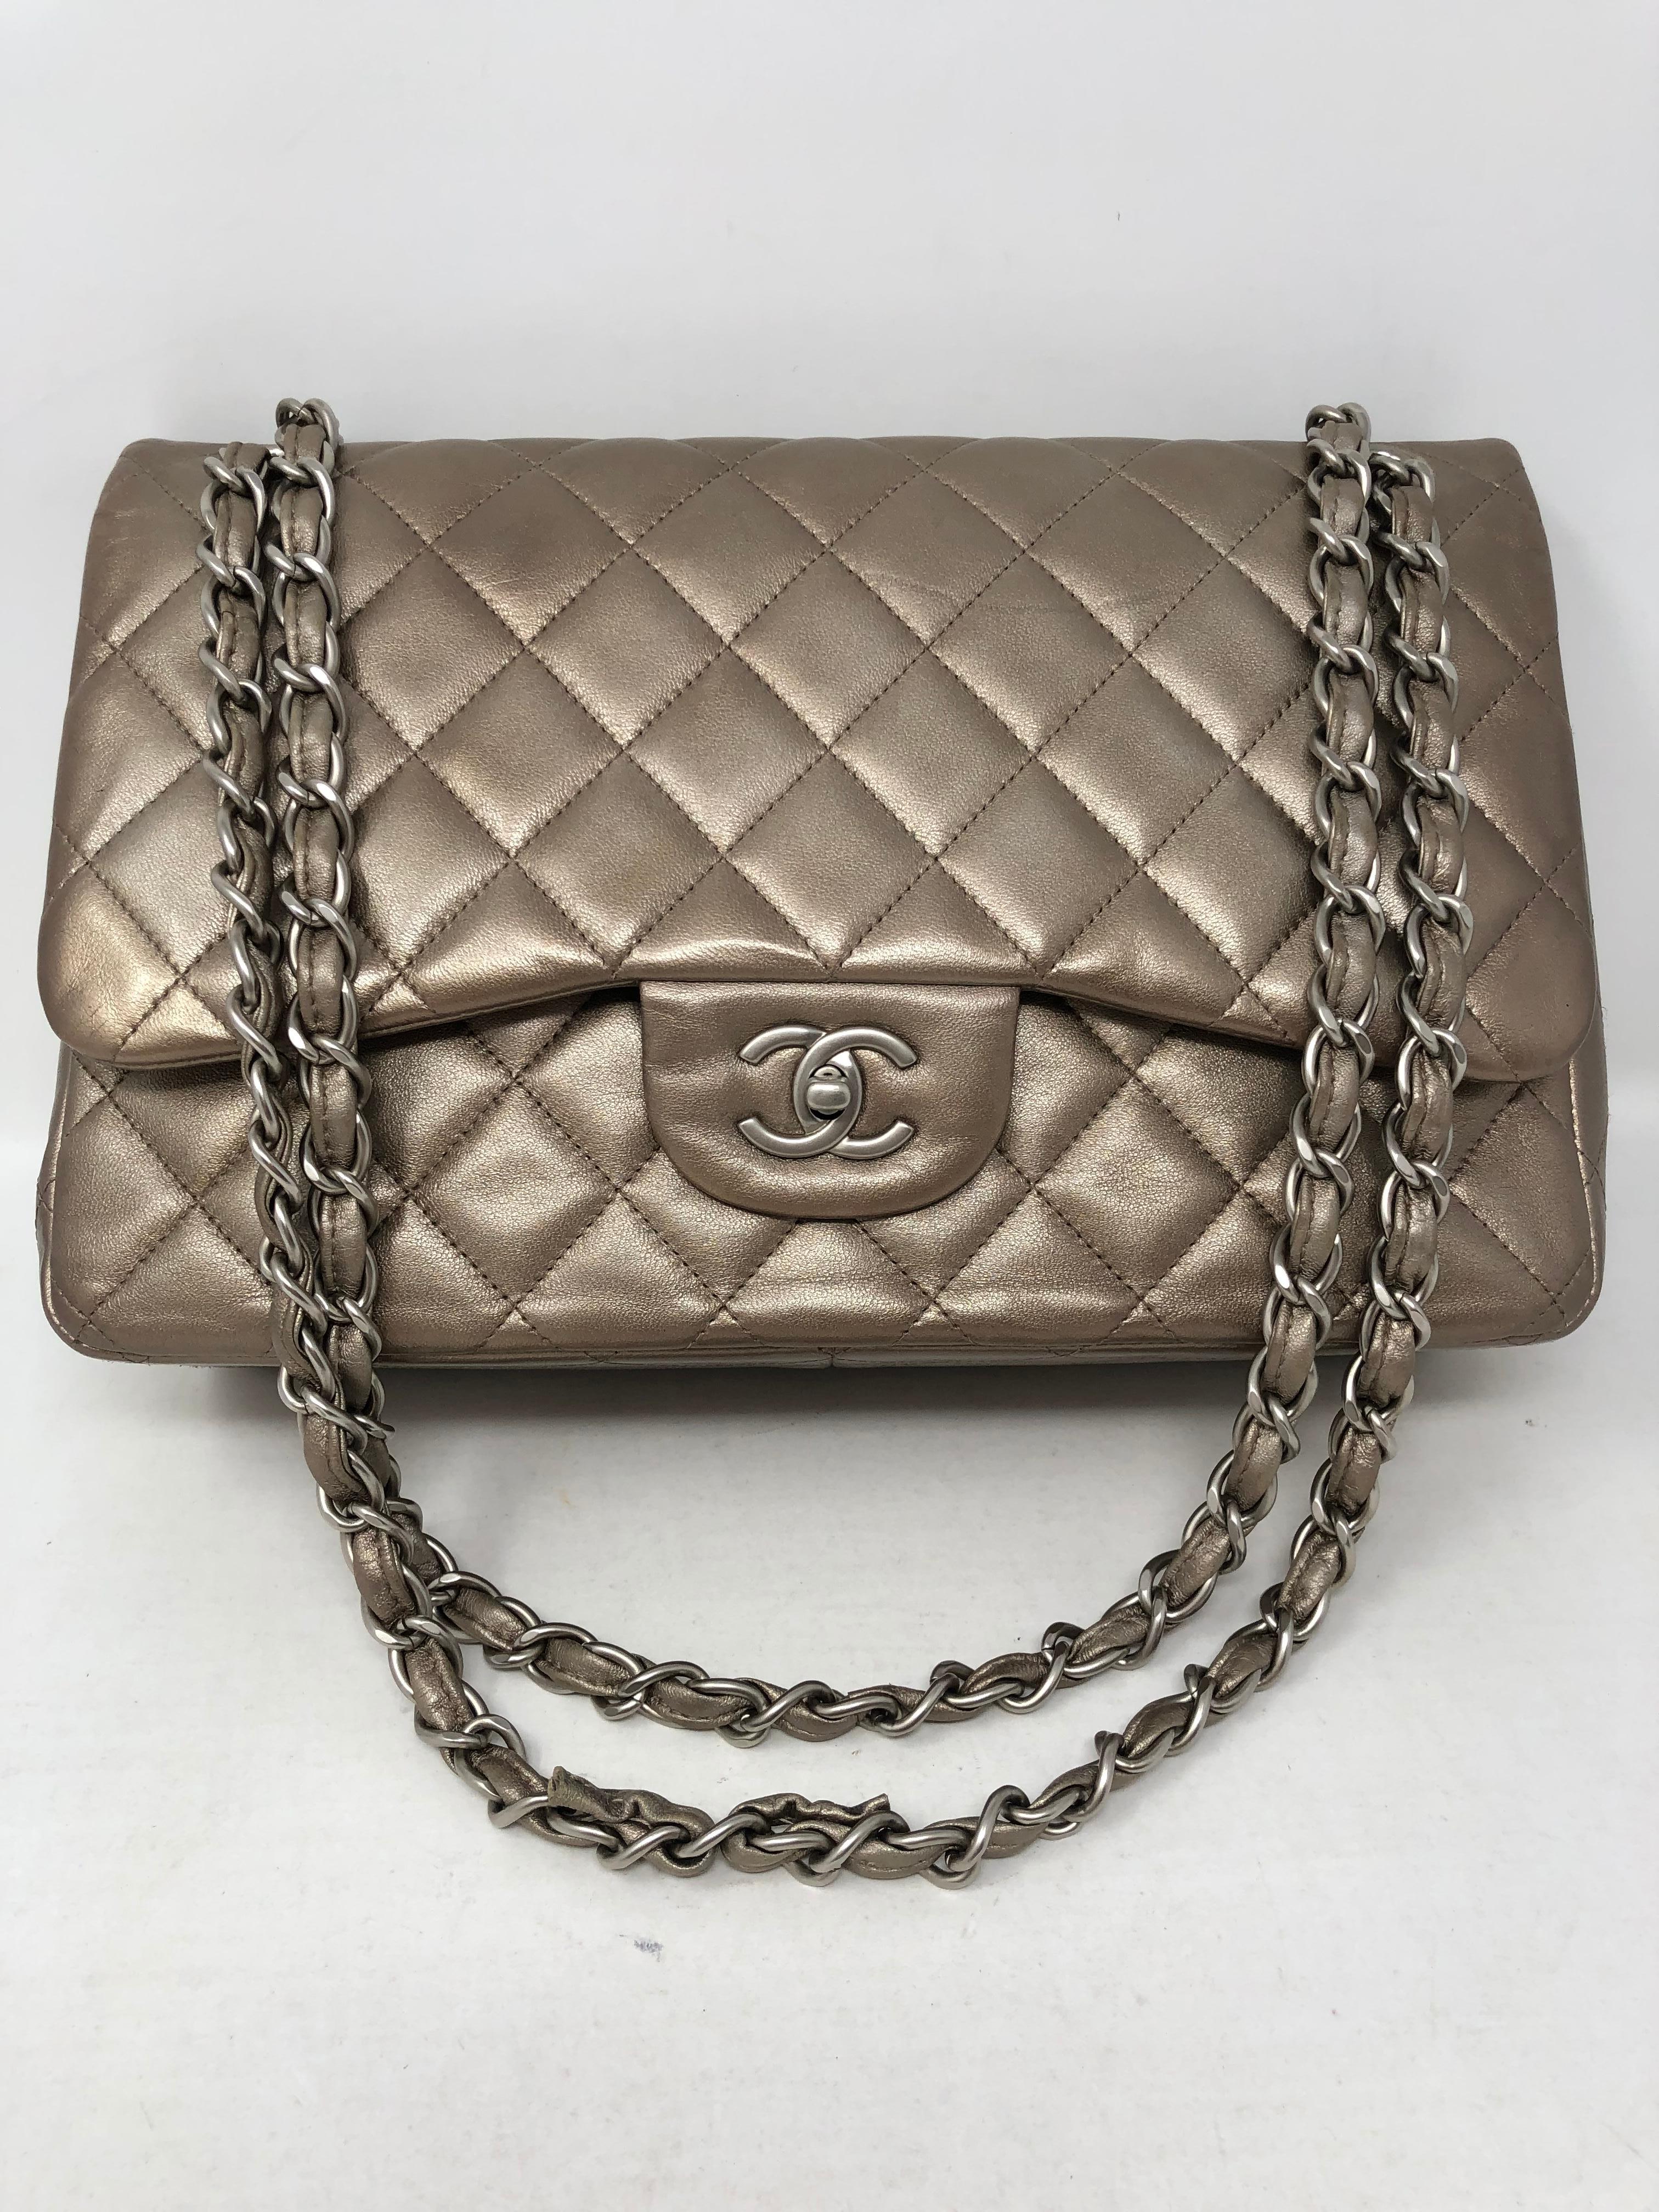 Chanel Jumbo Bronze Metallic in lambskin leather. Beautiful neutral color for all seasons. Silvertone with bronze color. Silver hardware. Good condition. Bag can be worn doubled or as a crossbody. Guaranteed authentic. 